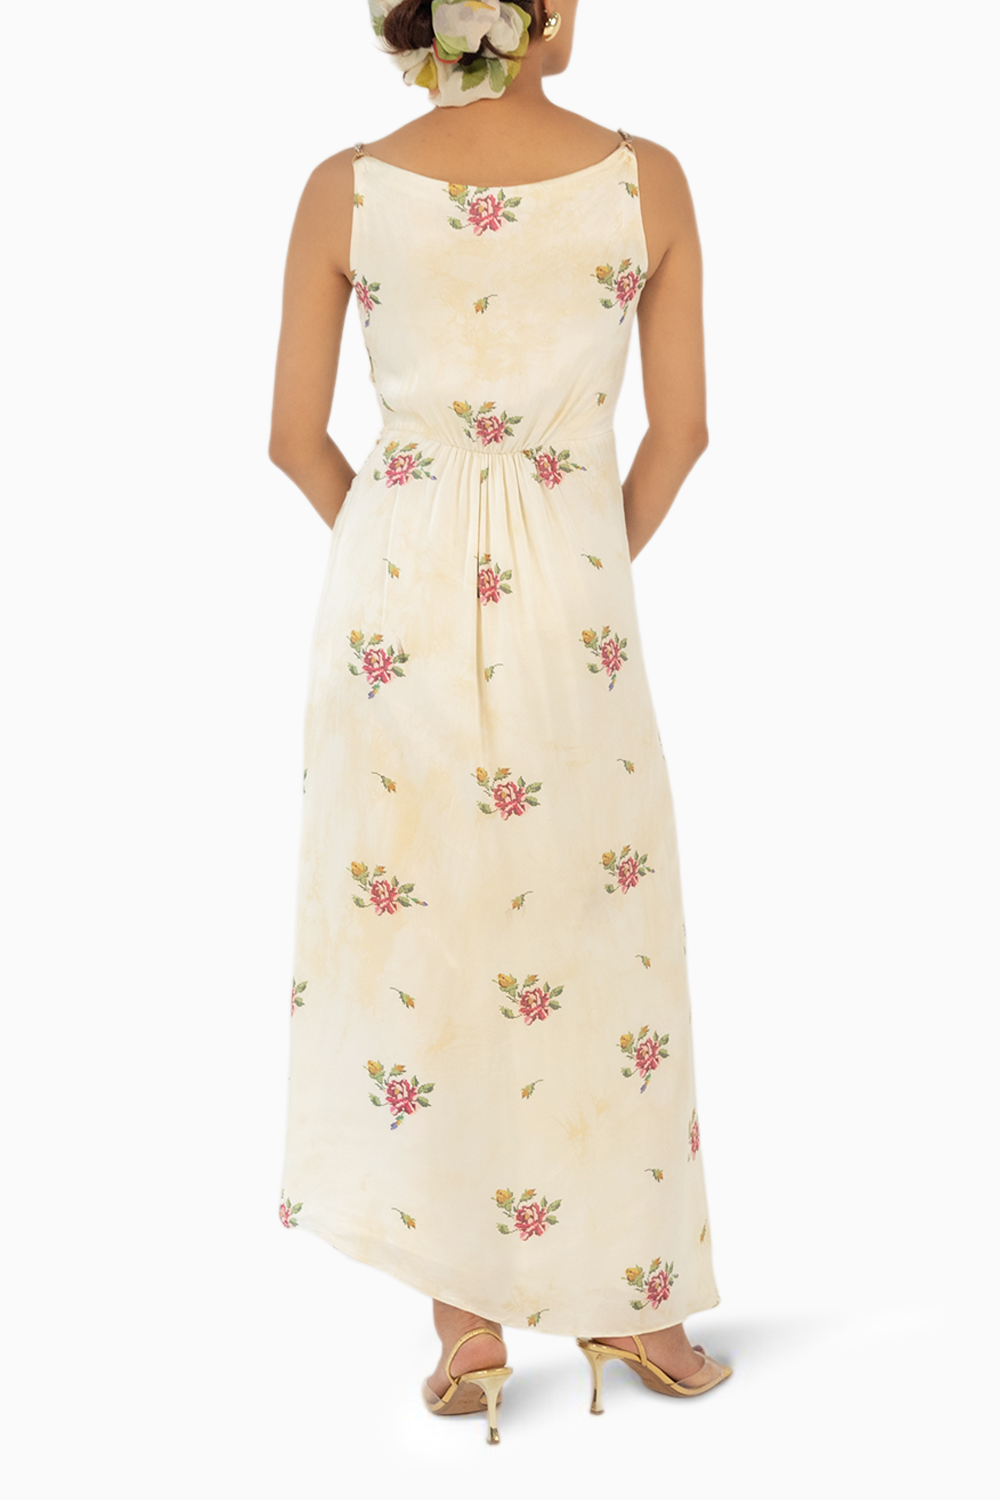 Floral Hearts Dress